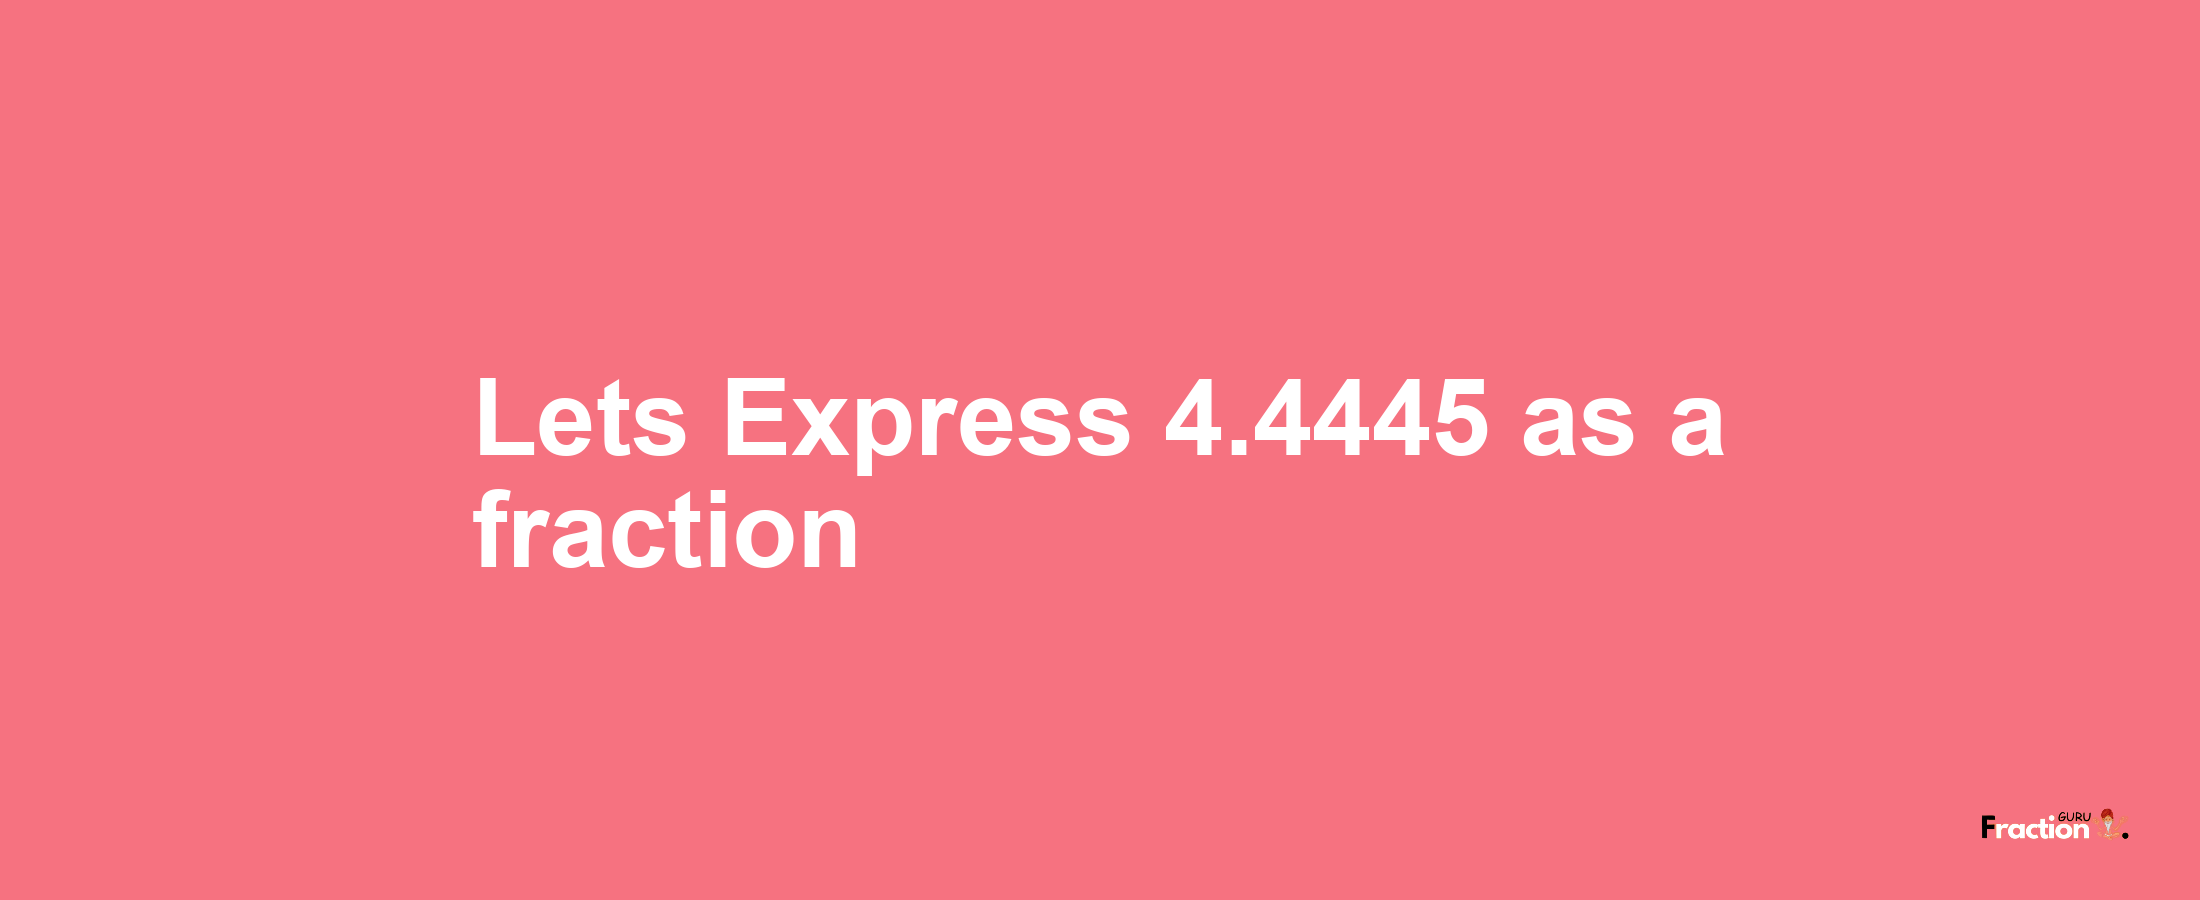 Lets Express 4.4445 as afraction